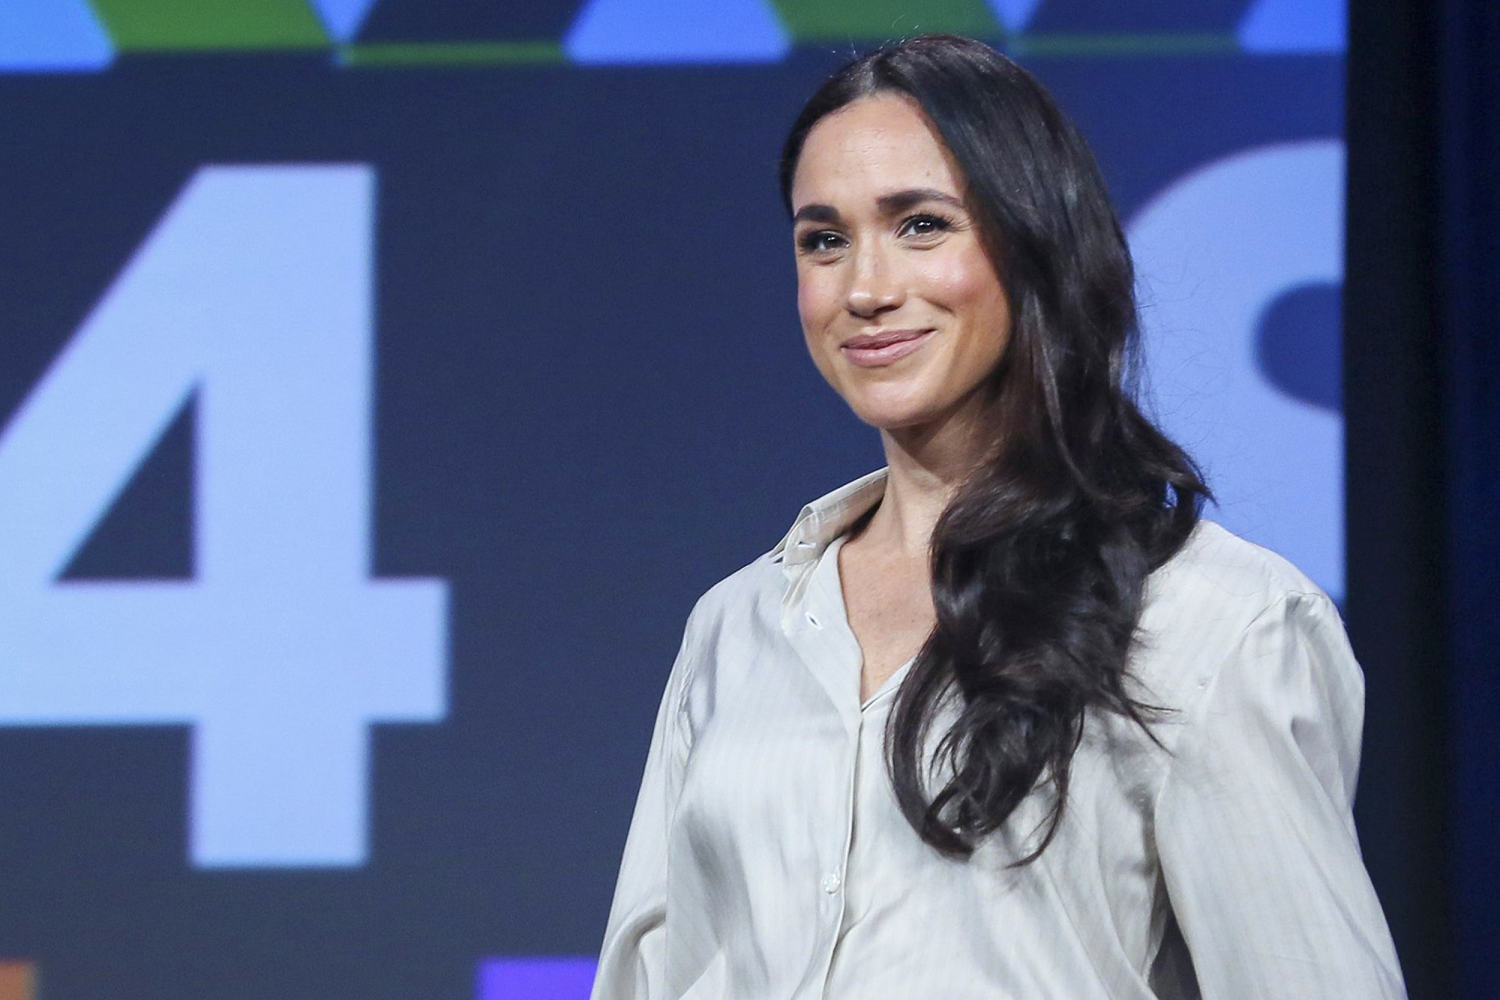 Meghan Markle describes ‘hateful’ online abuse while she was pregnant